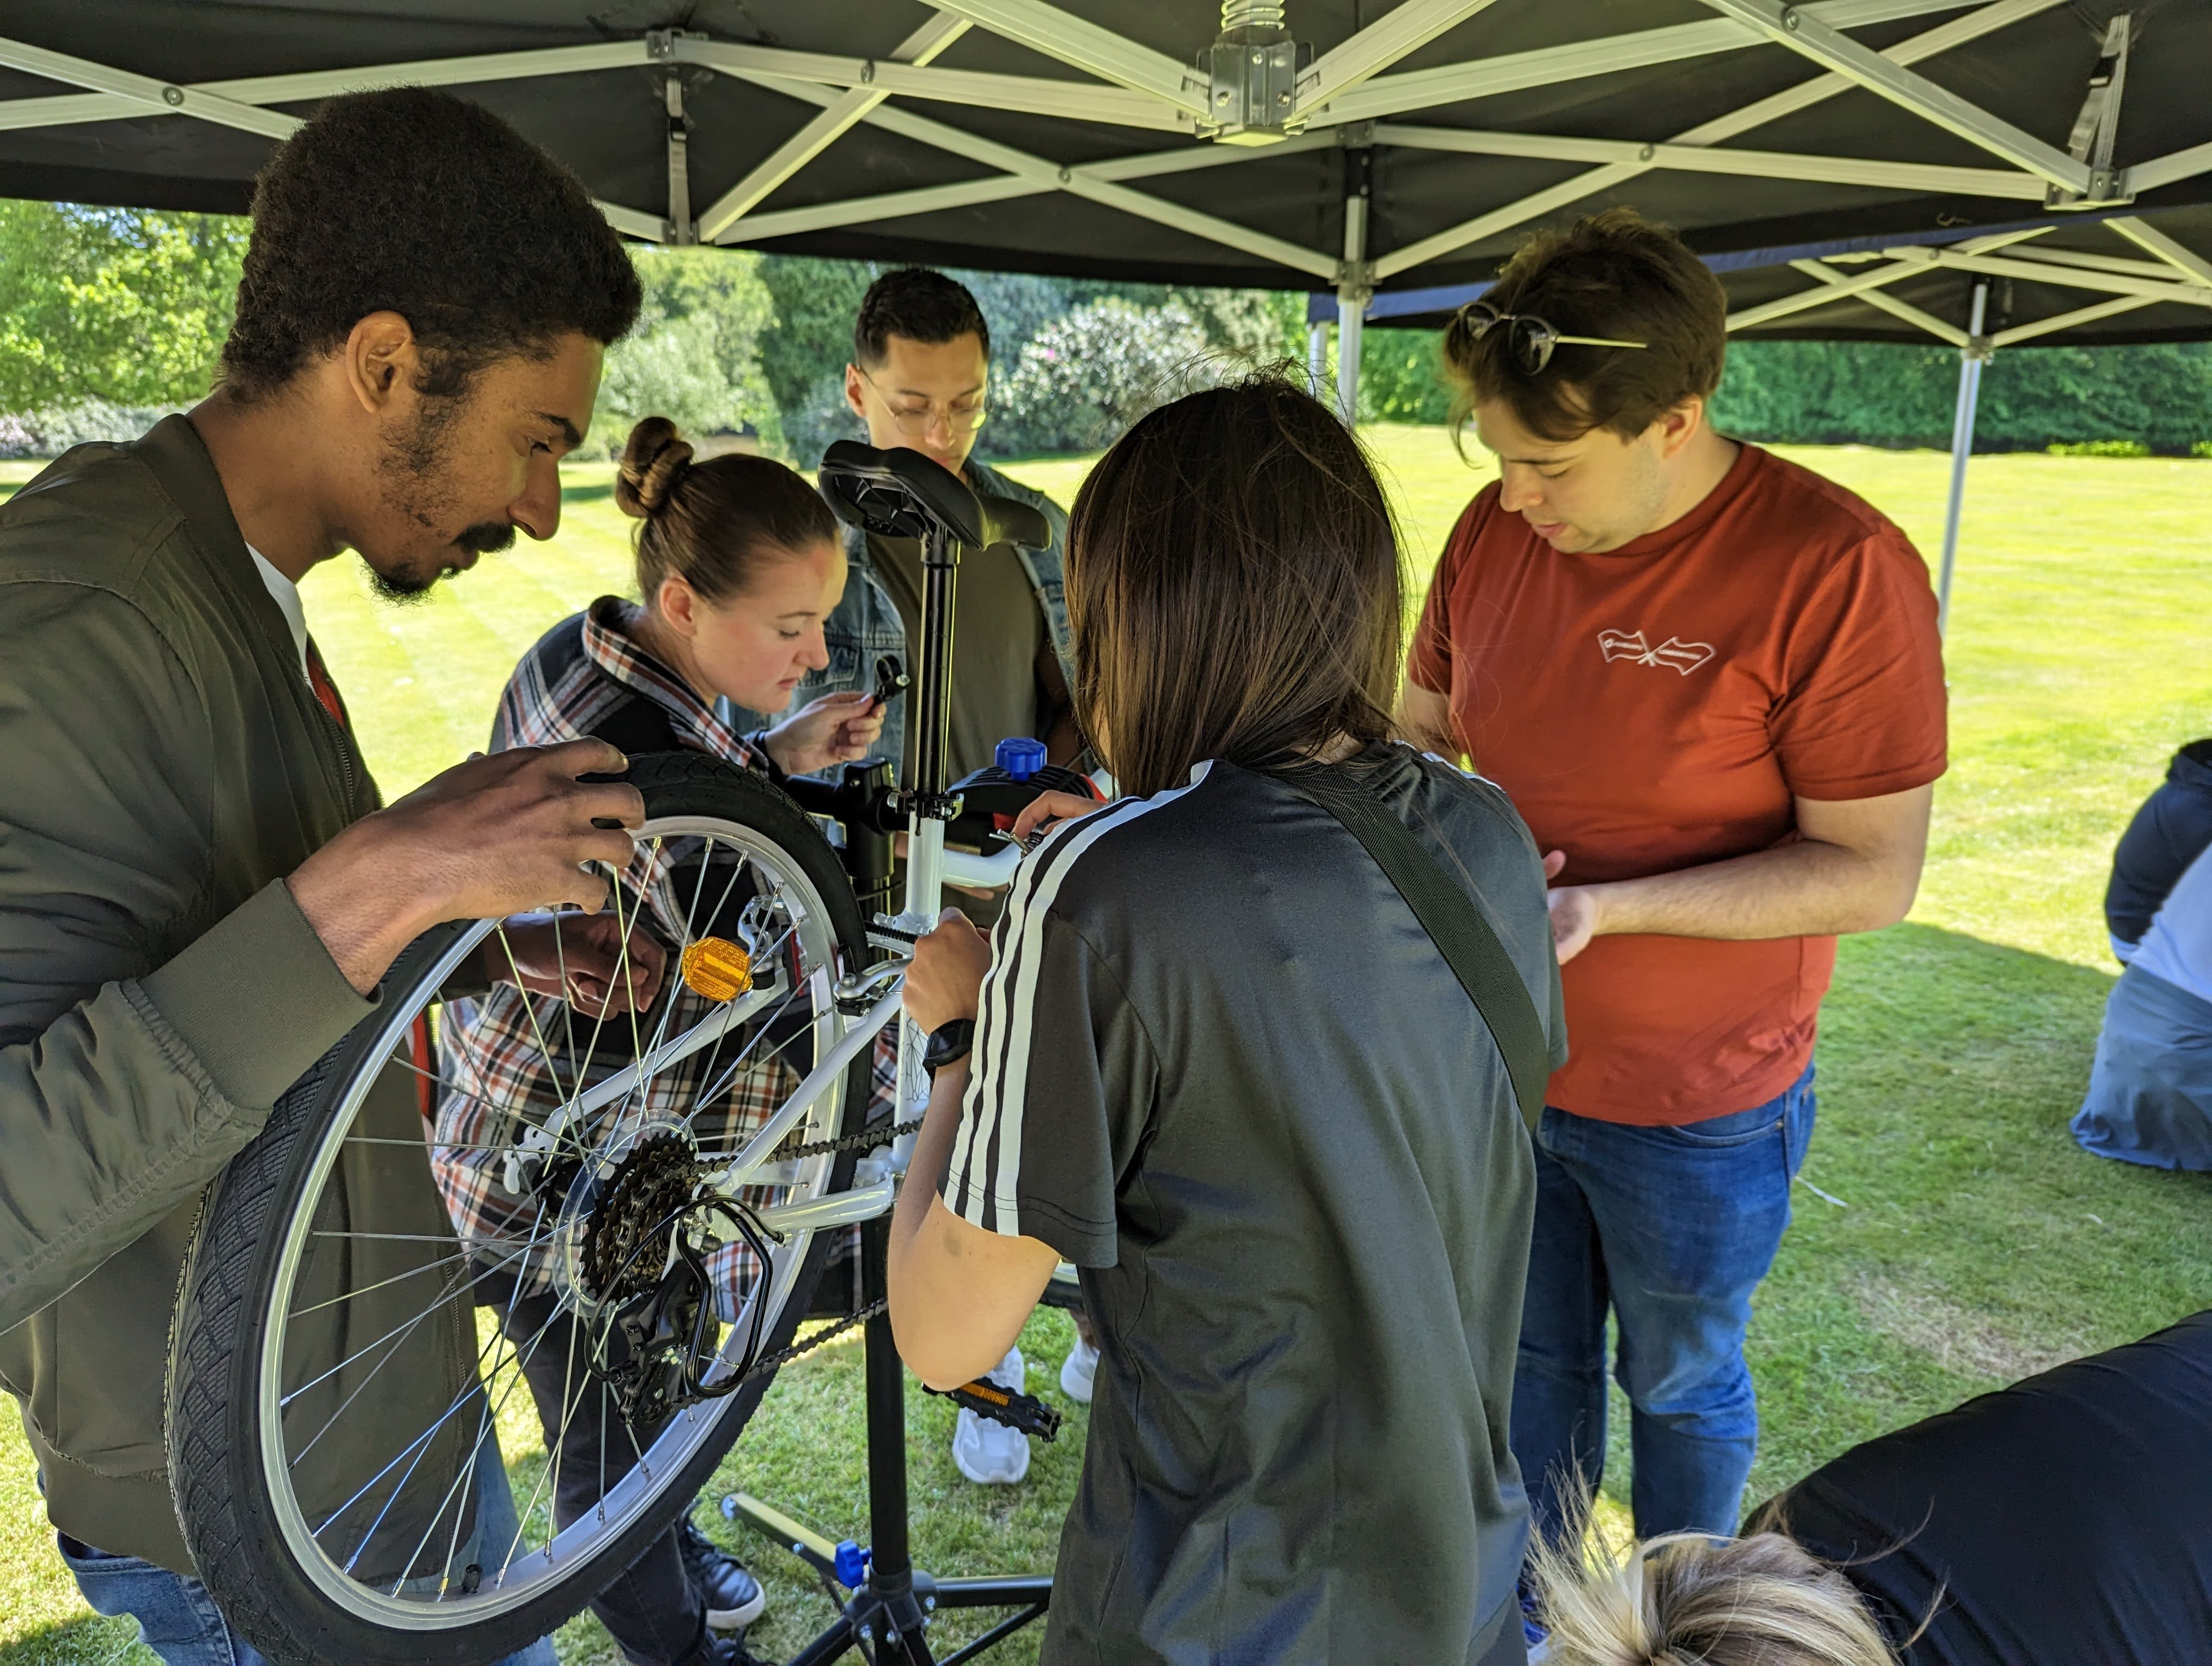 FundApps team working together to build a bike. Join the ride with FundApps and re-cycle. We are a B-Corp having a positive impact for the planet.